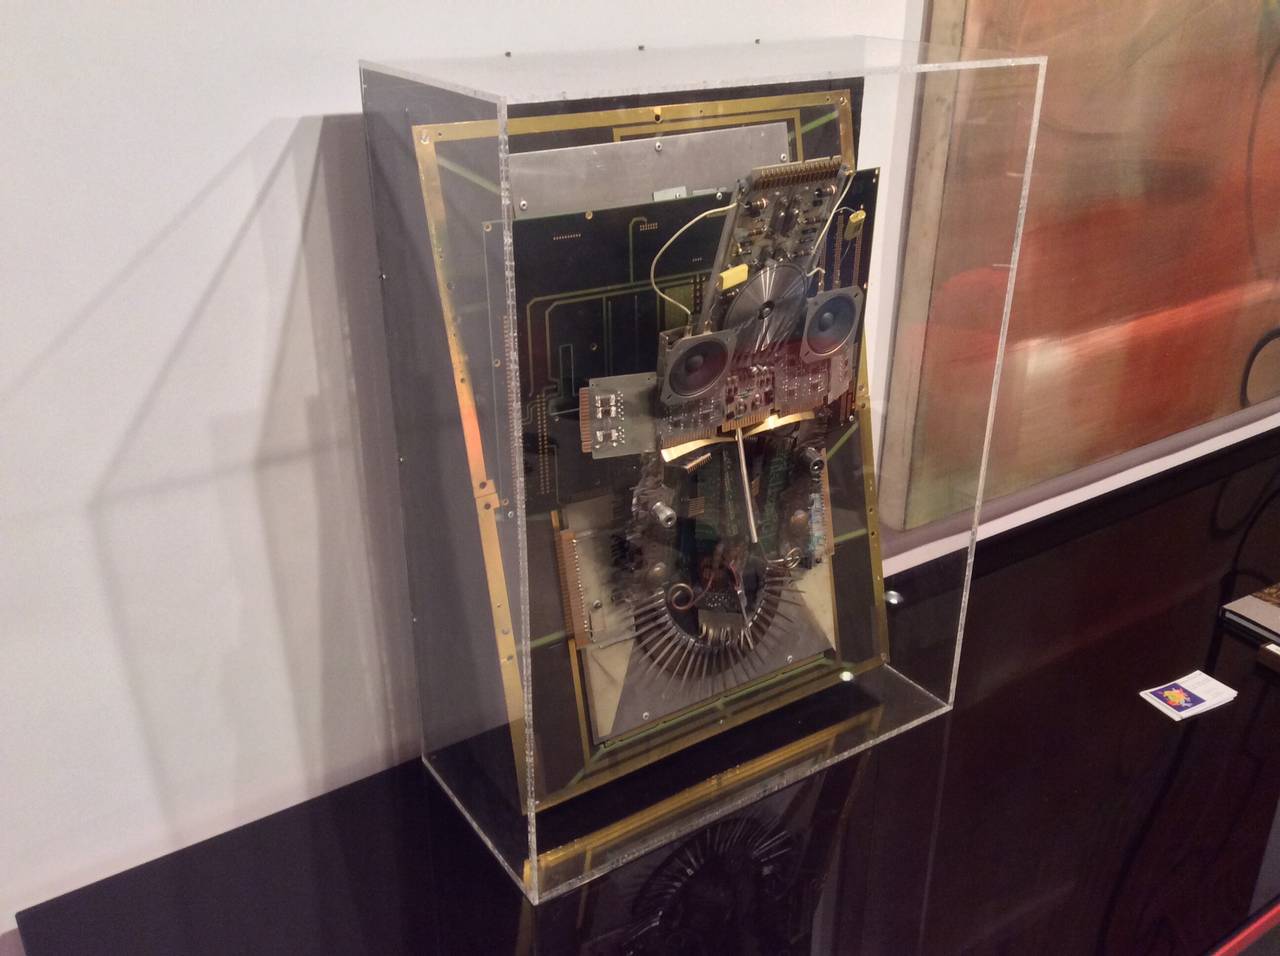 A signed rather unique wall sculpture comprised of old computer chips and equipment. It is housed in a Lucite frame. It is dated 1988.
There are some missing pieces, although we are unable to definitely tell where. The lucite edges have crackling